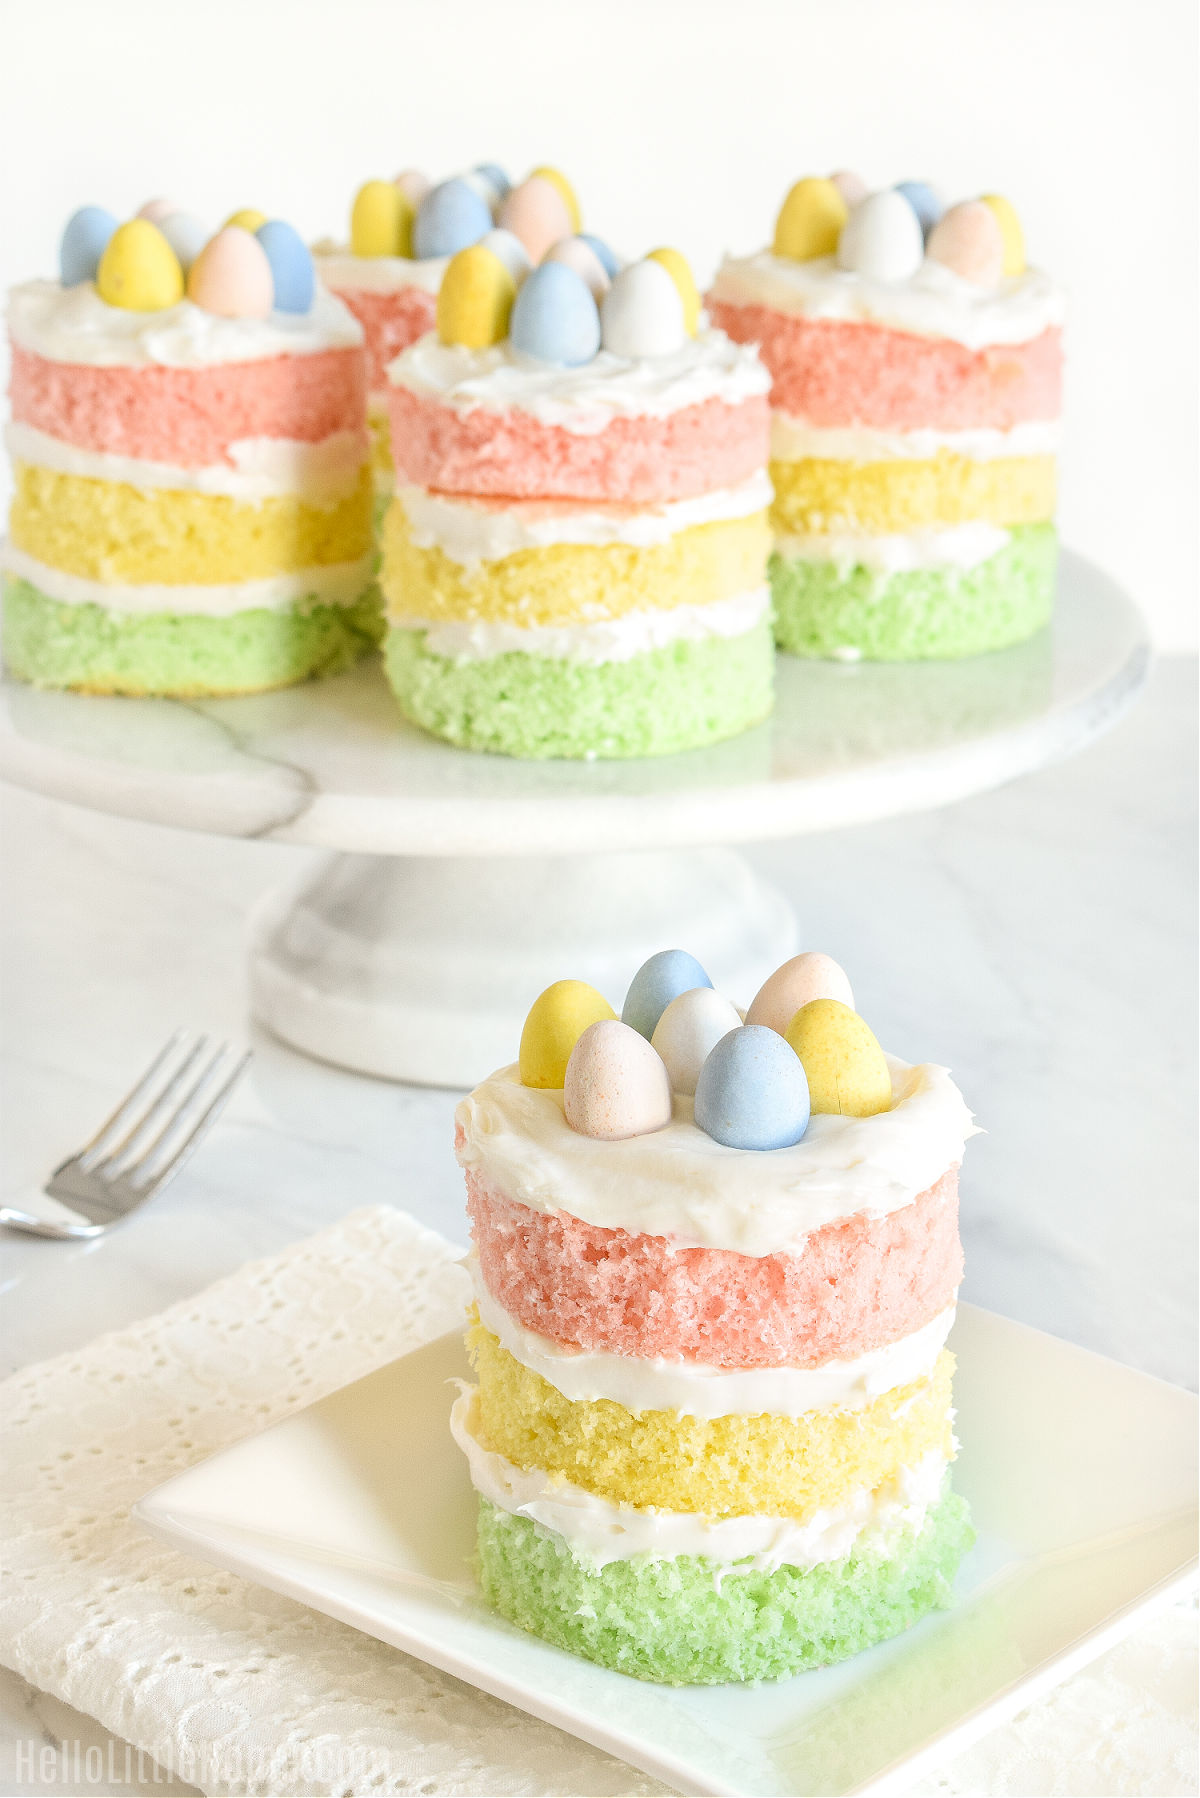 An individual cake decorated with Cadbury Mini Eggs with more cakes on a pedestal in the background.